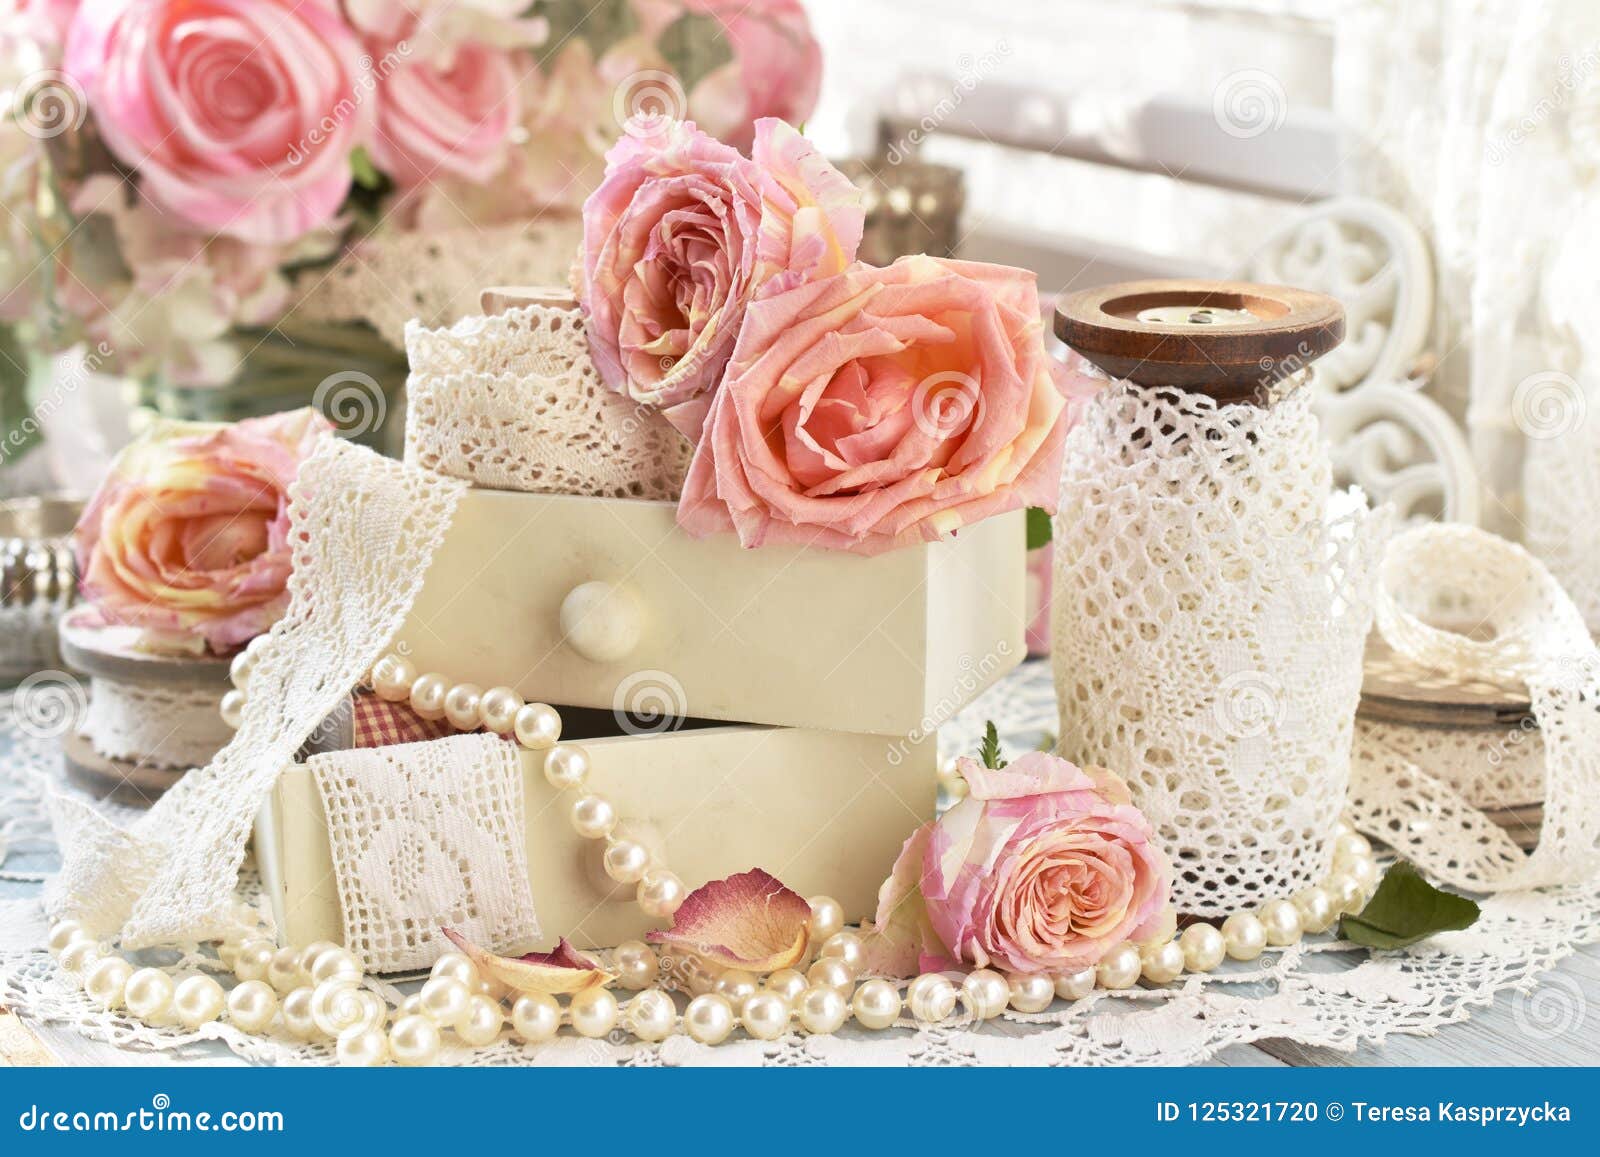 shabby chic style decorations with roses and laces